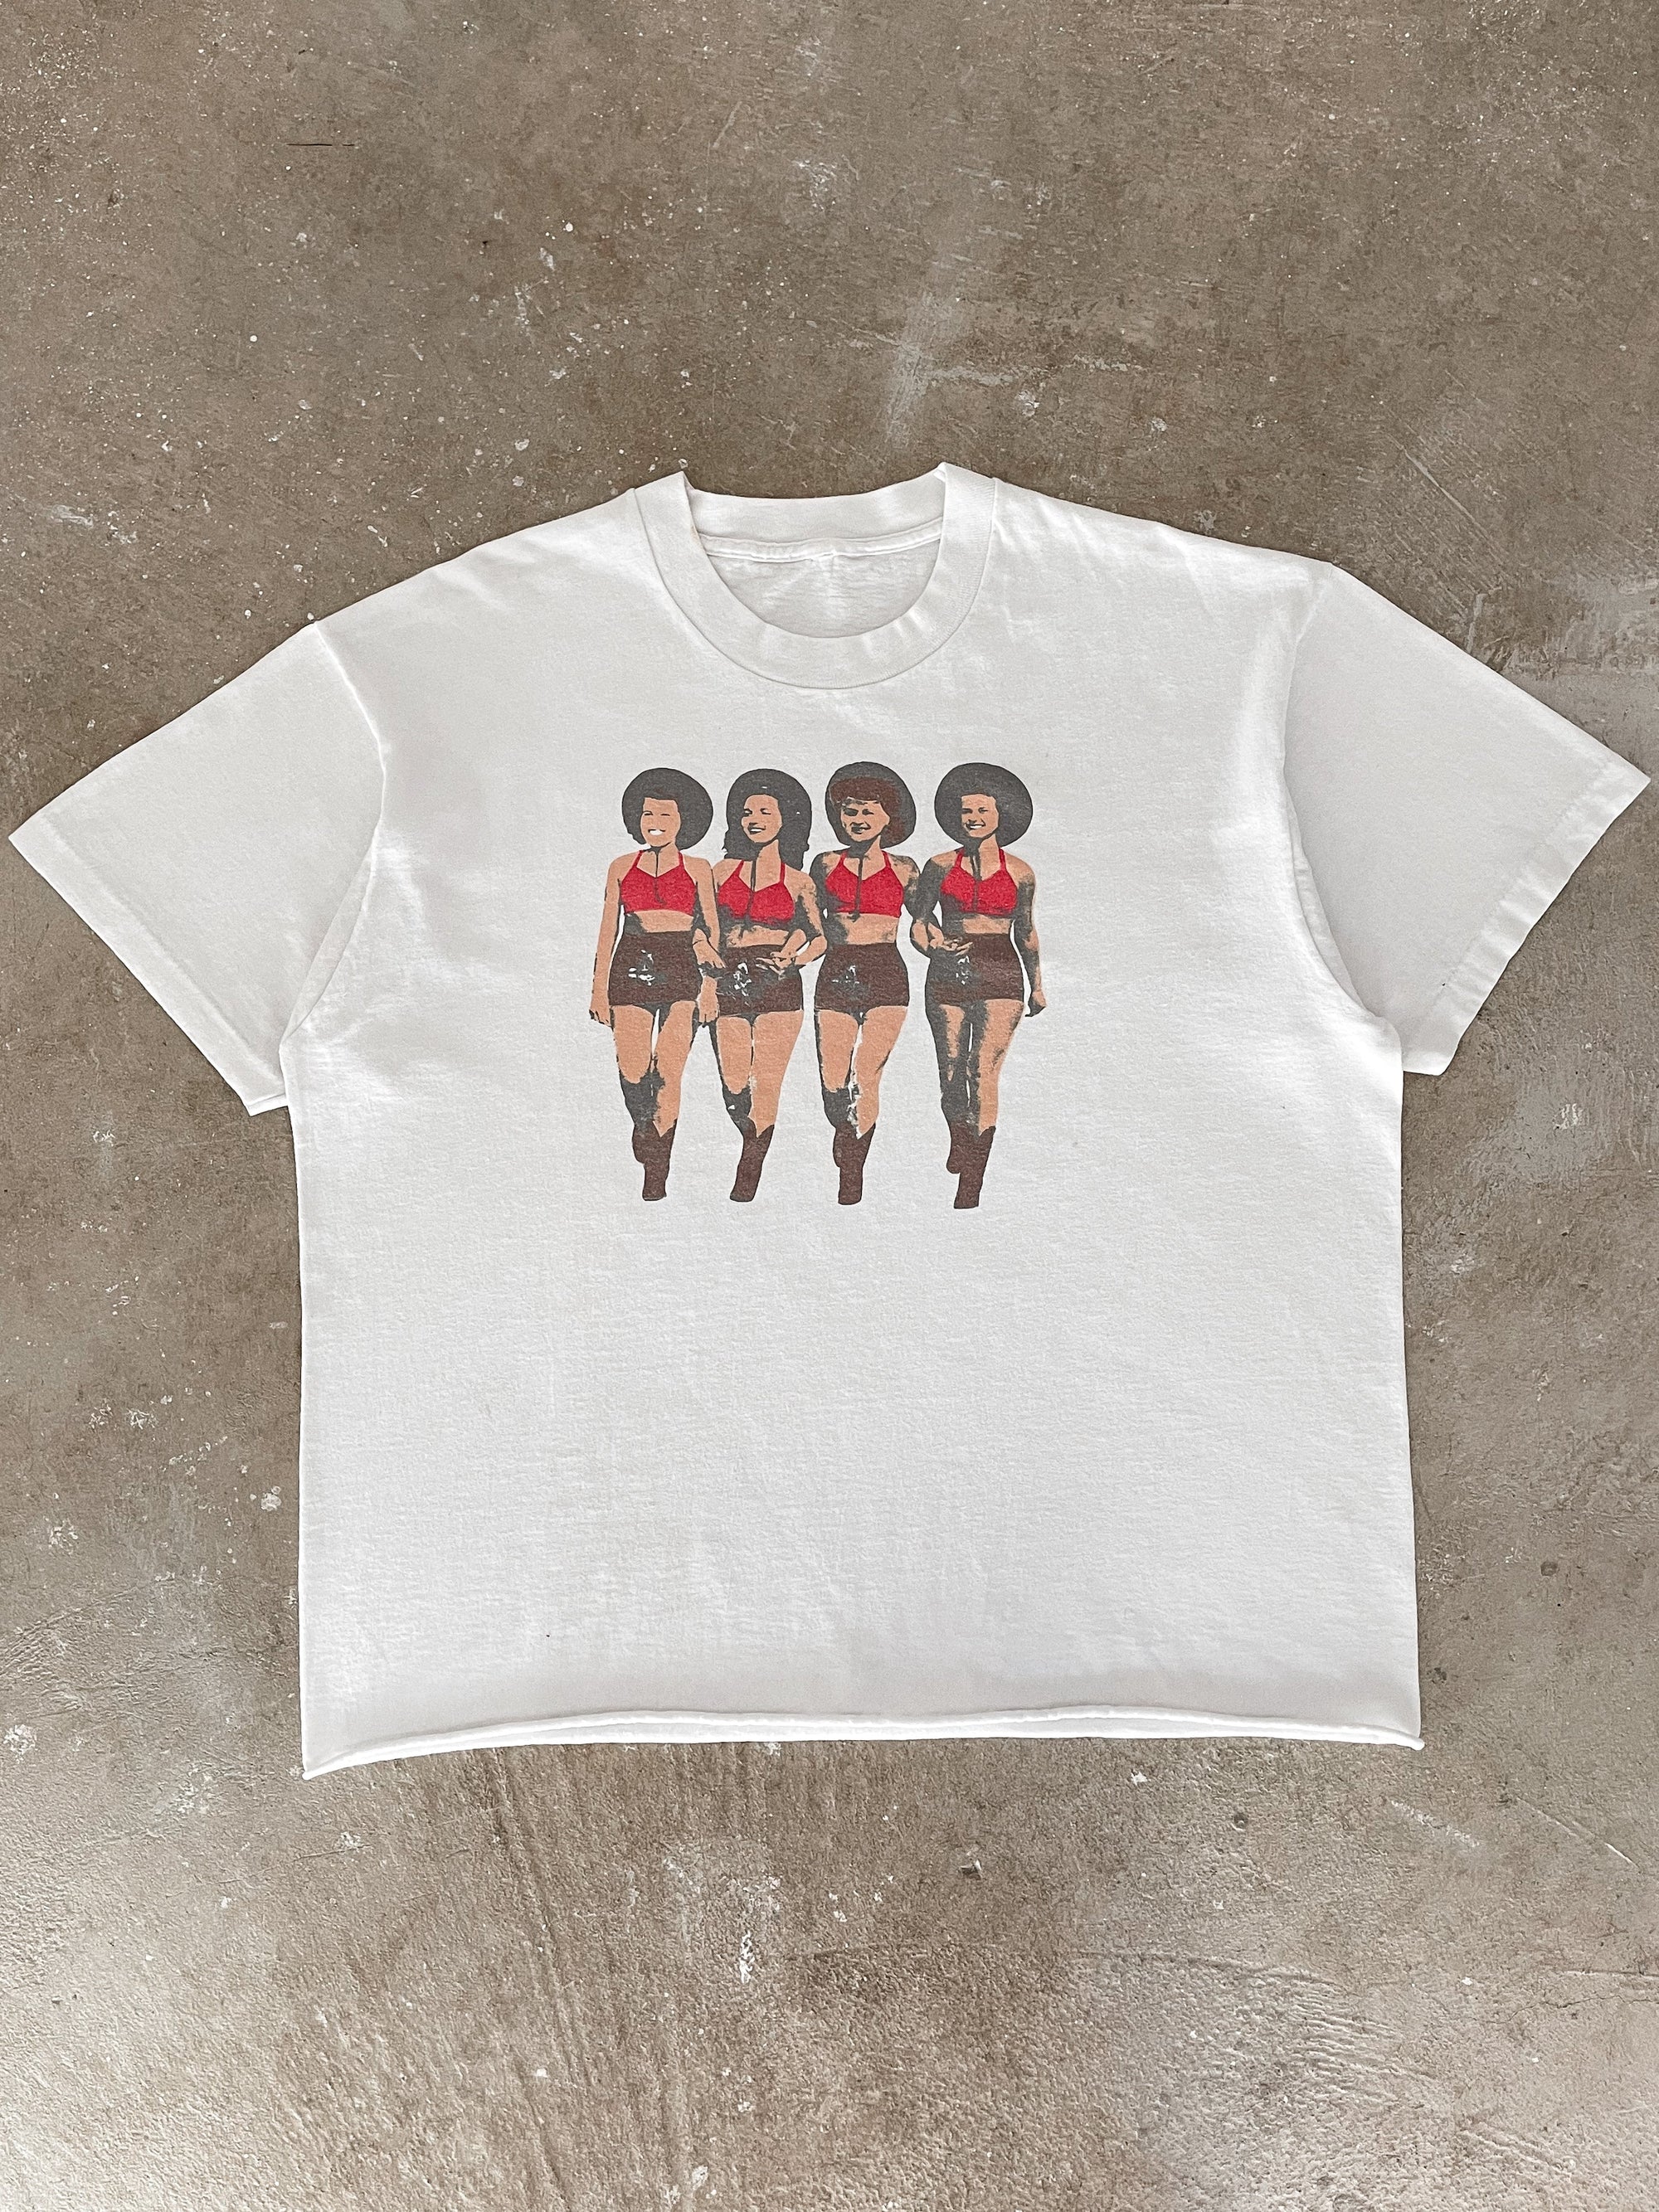 1990s “Cowgirls” Cropped Single Stitched Tee (L)